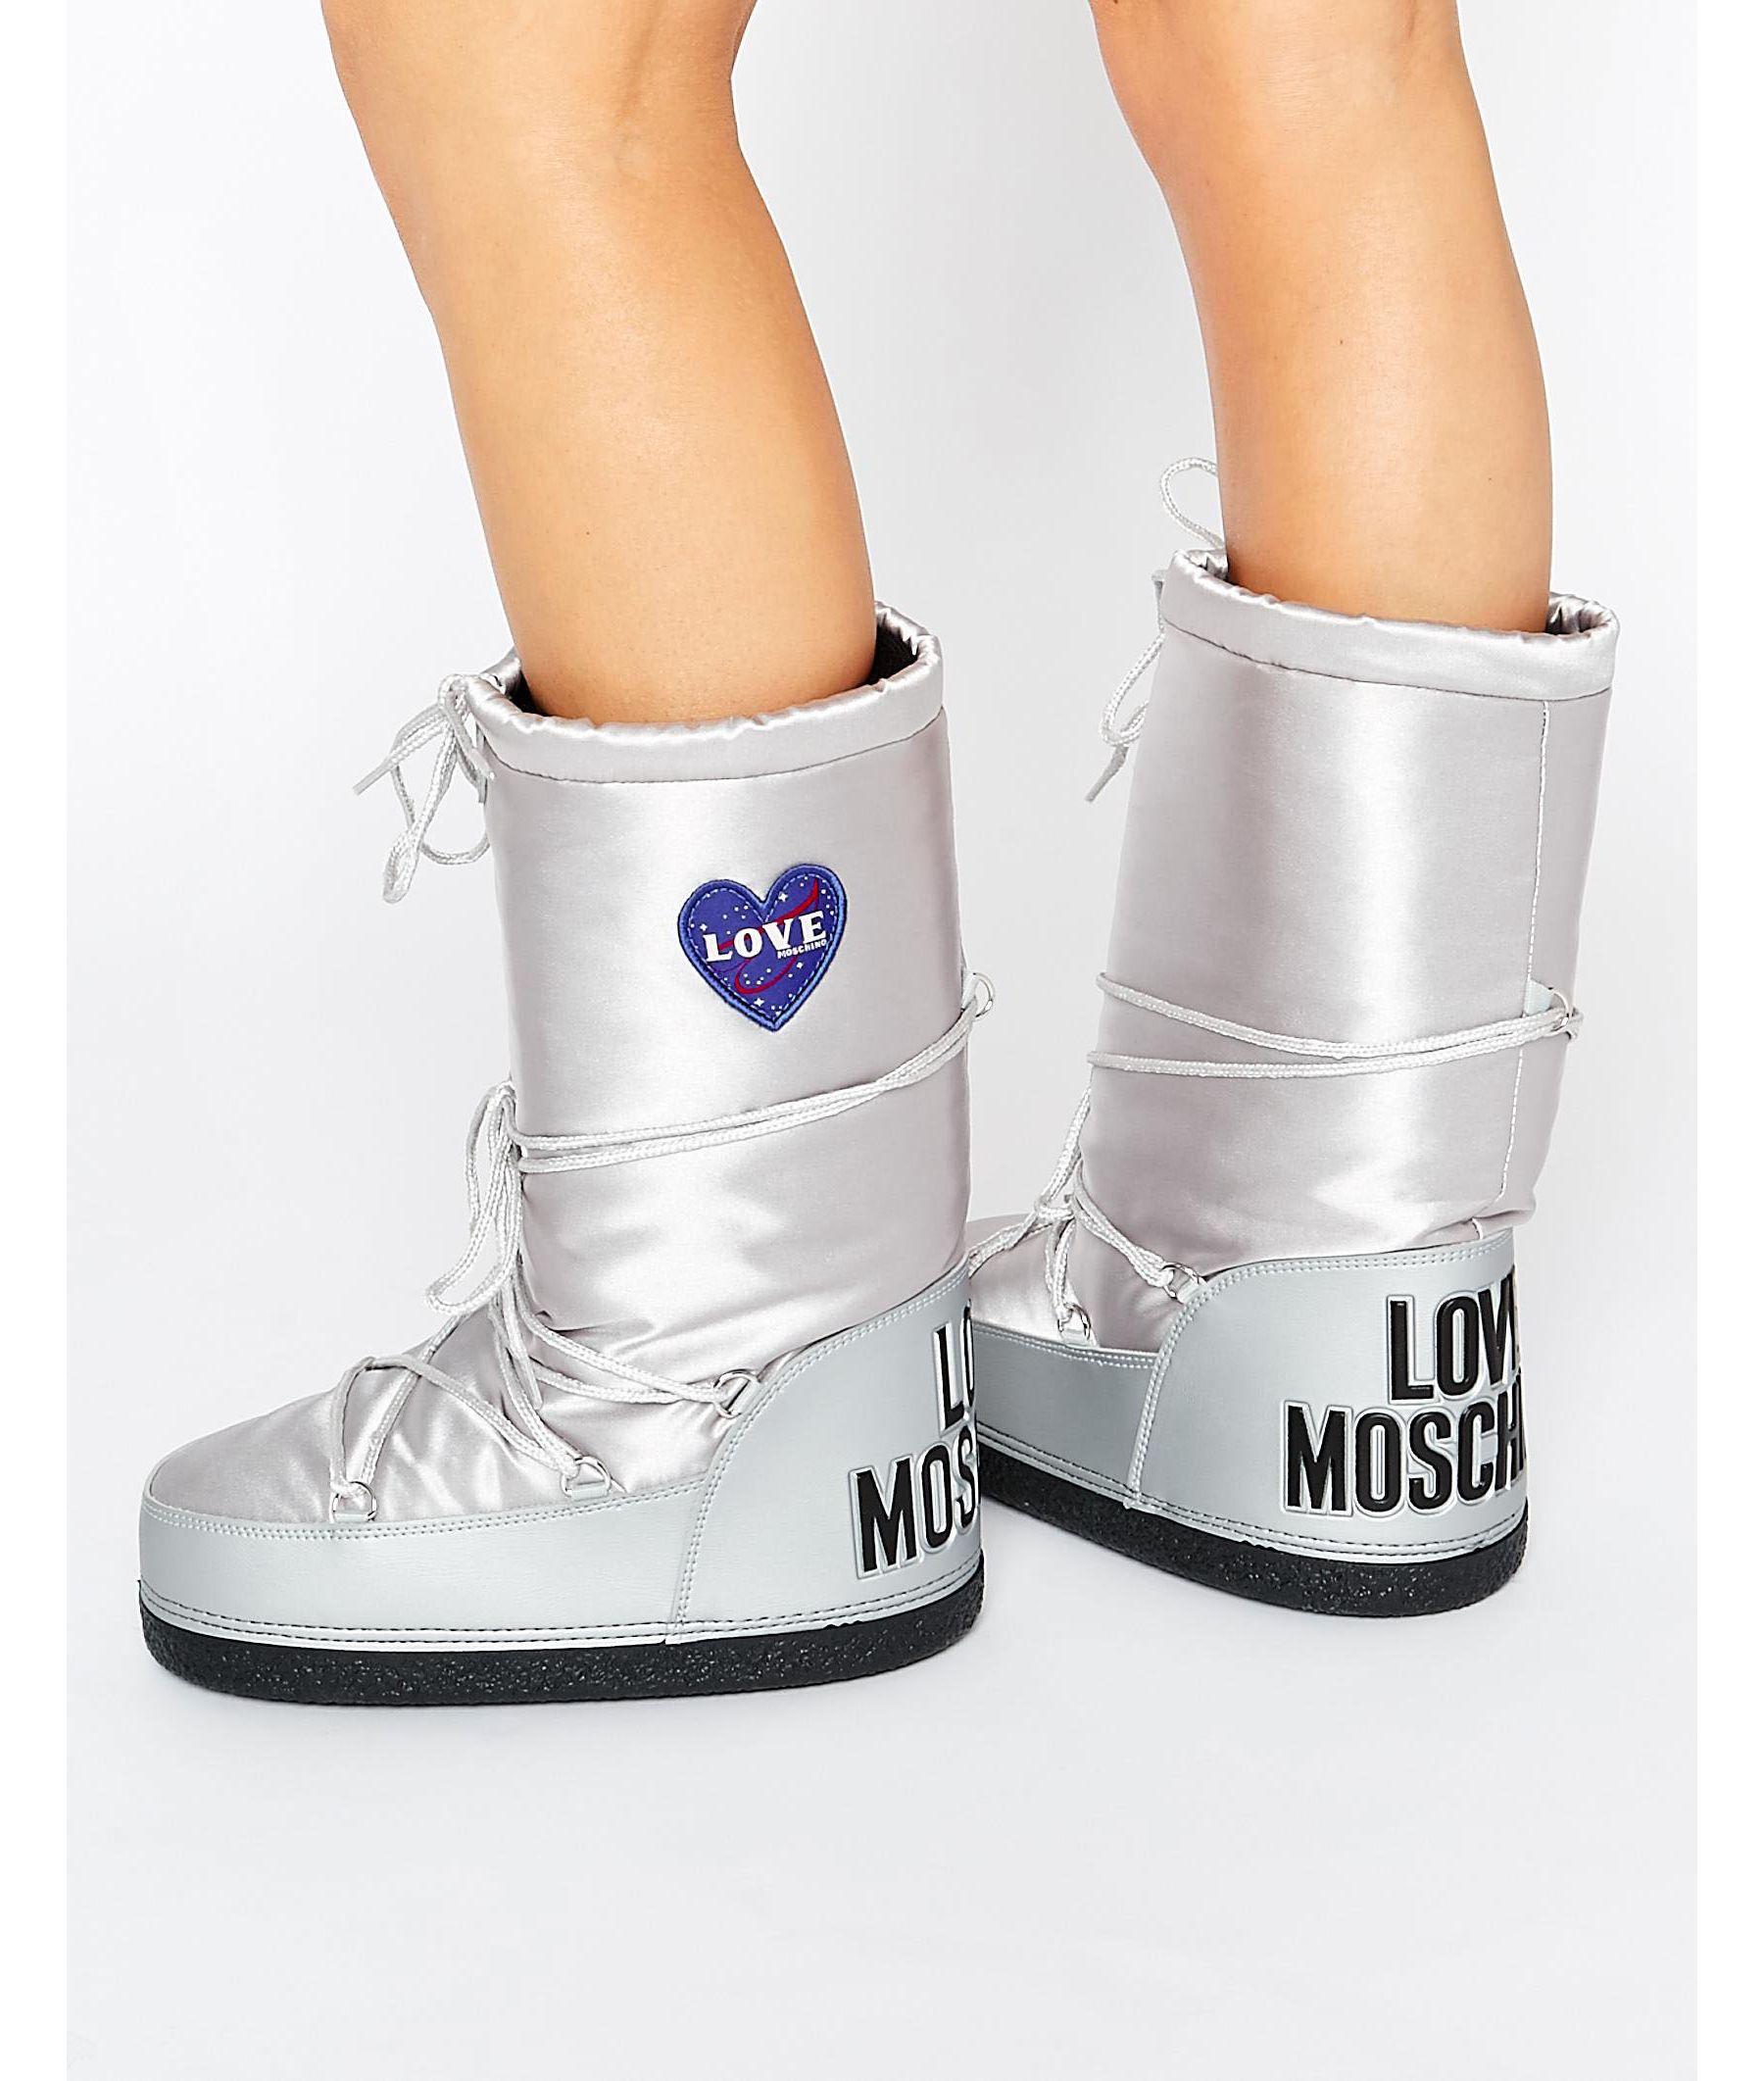 love moschino snow boots Off 63% - www.loverethymno.com